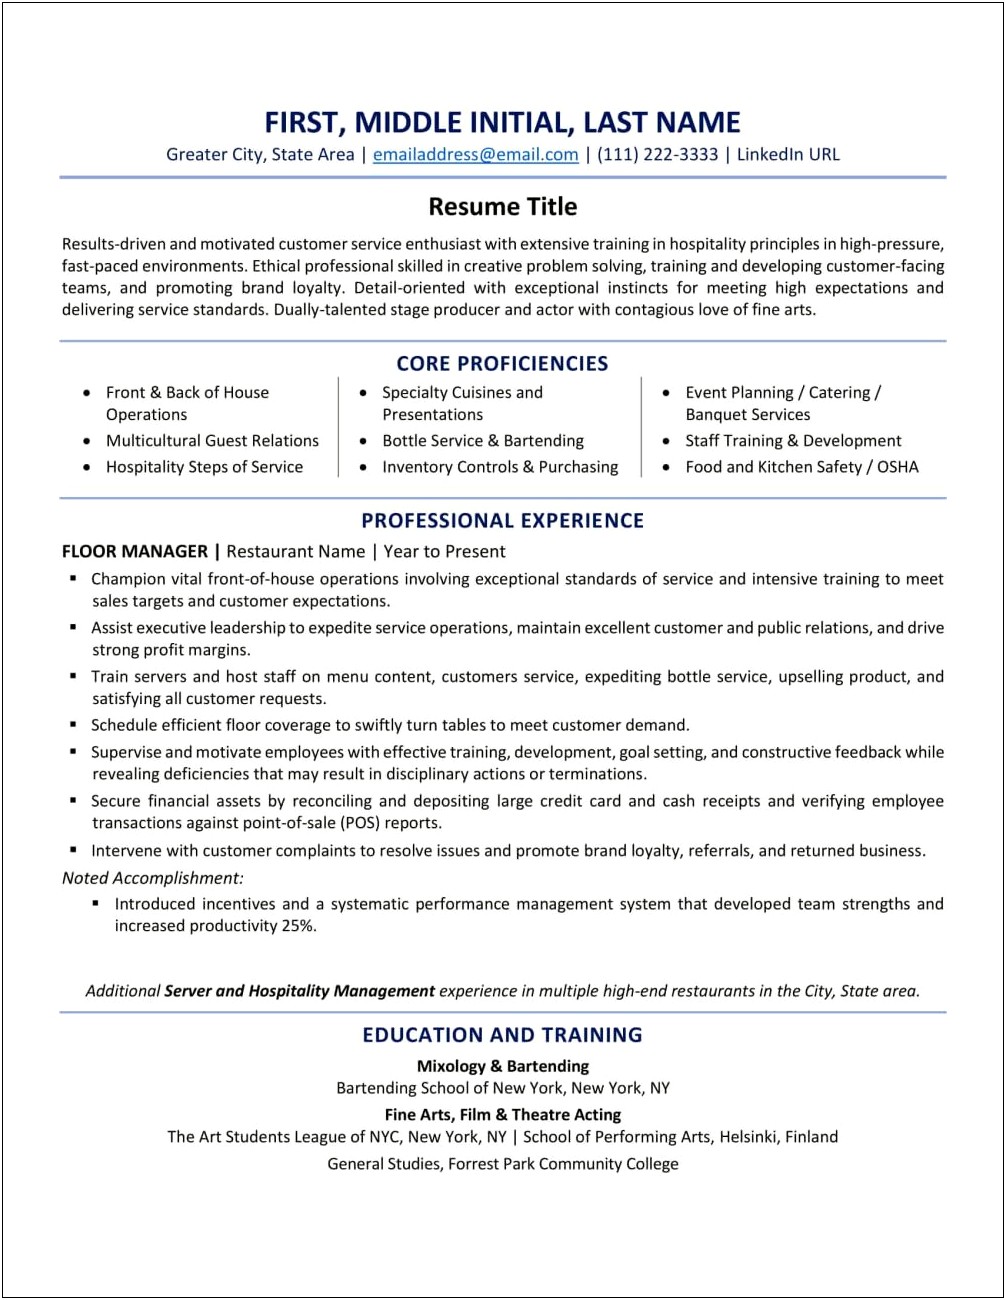 Resume Objectives First Time Job Seekers